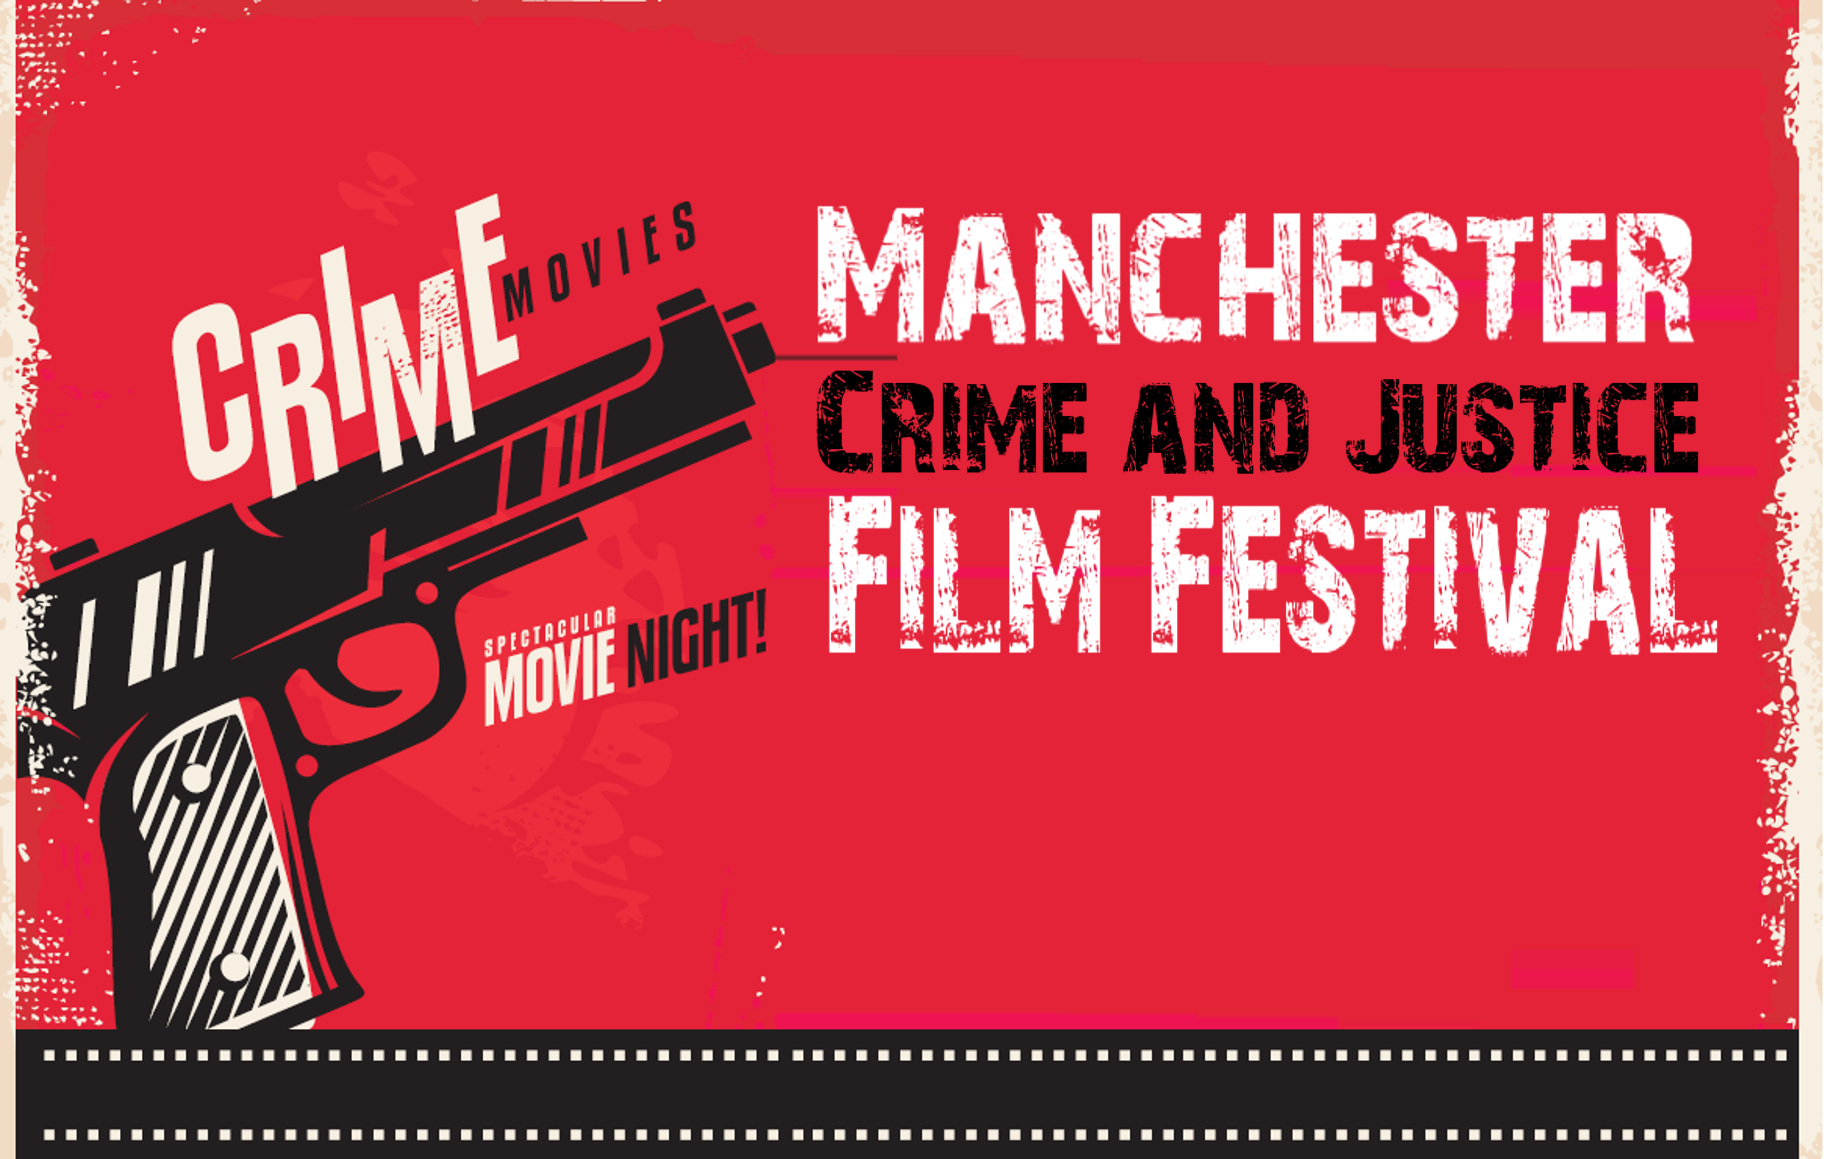 Full details of the second Manchester Crime and Justice Film Festival will be released shortly. The first festival took place in May 2019.